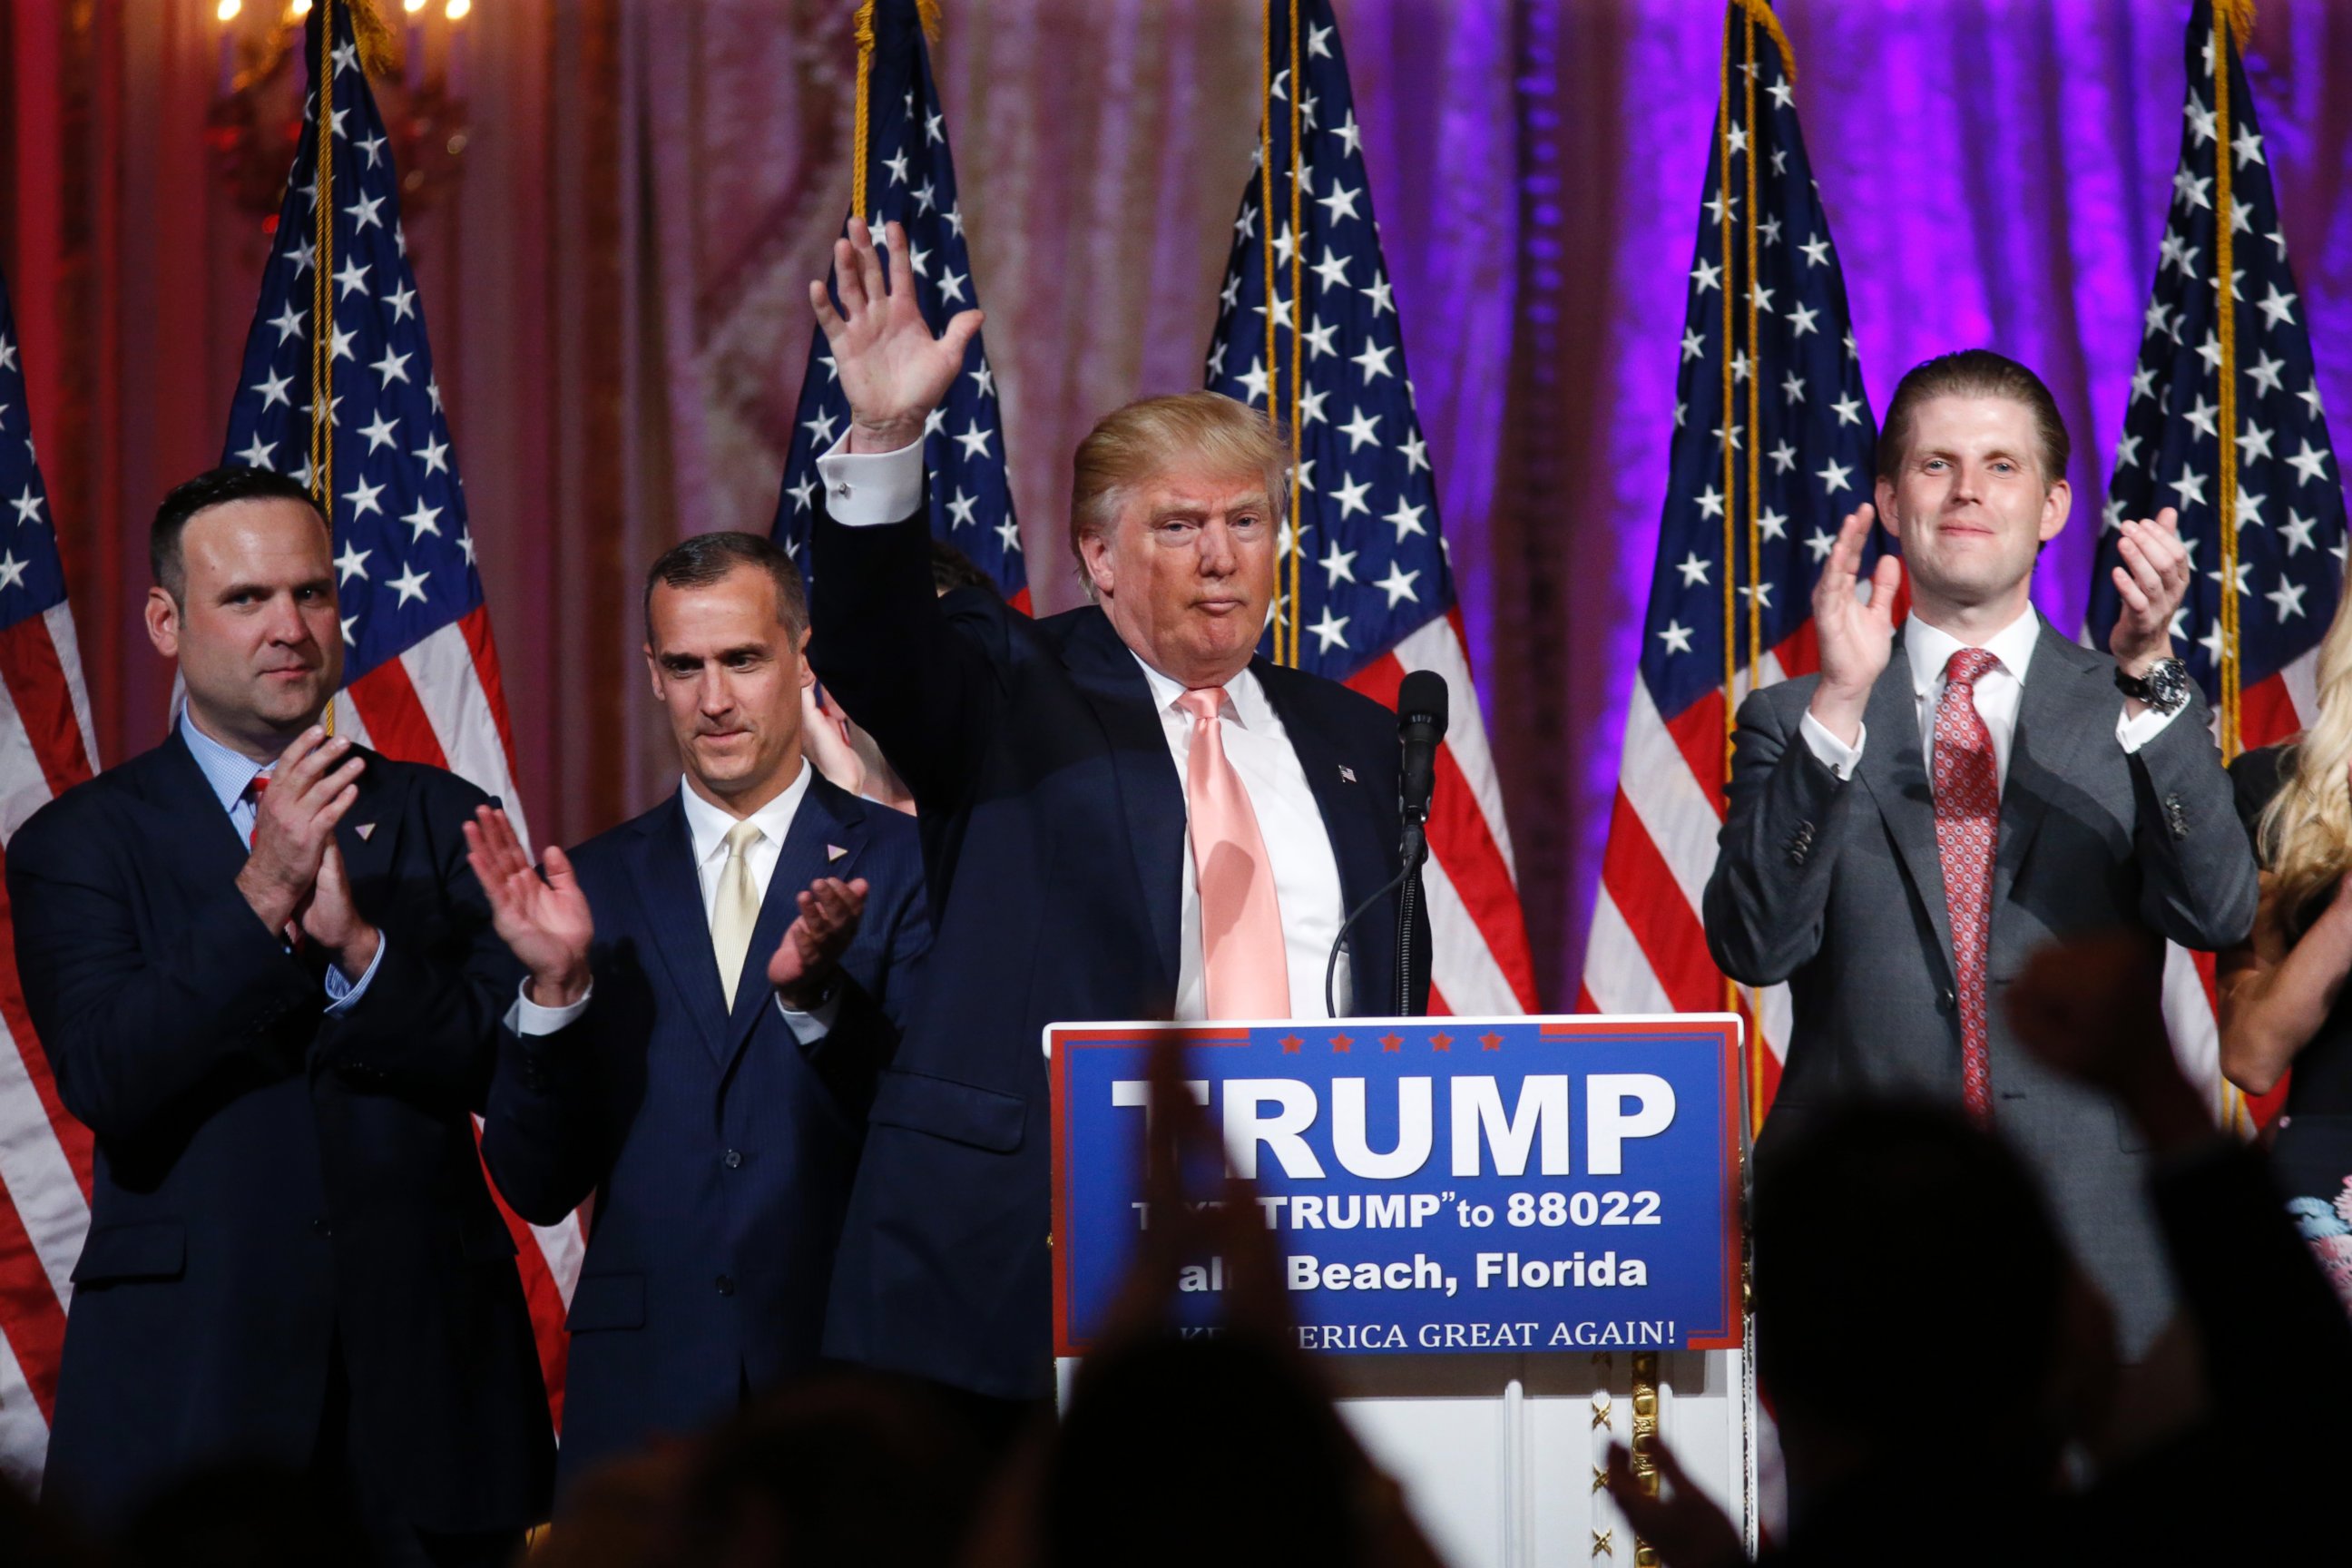 PHOTO: Dan Scavino is pictured at a Donald Trump event event at Mar-a-Lago Club in Palm Beach, Fla., March 15, 2016.